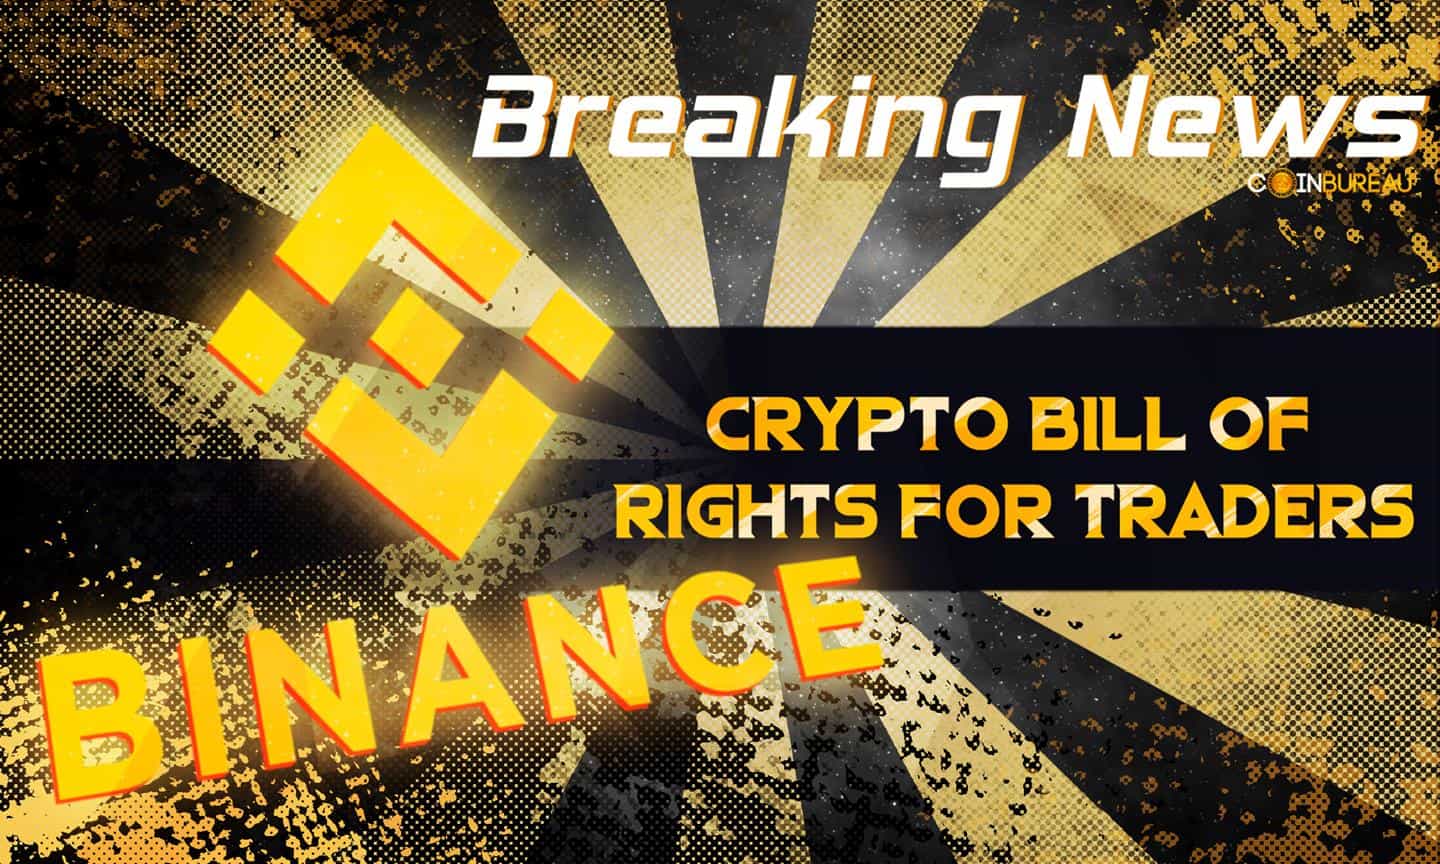 Global Exchange Binance Releases Crypto Bill of Rights For Traders